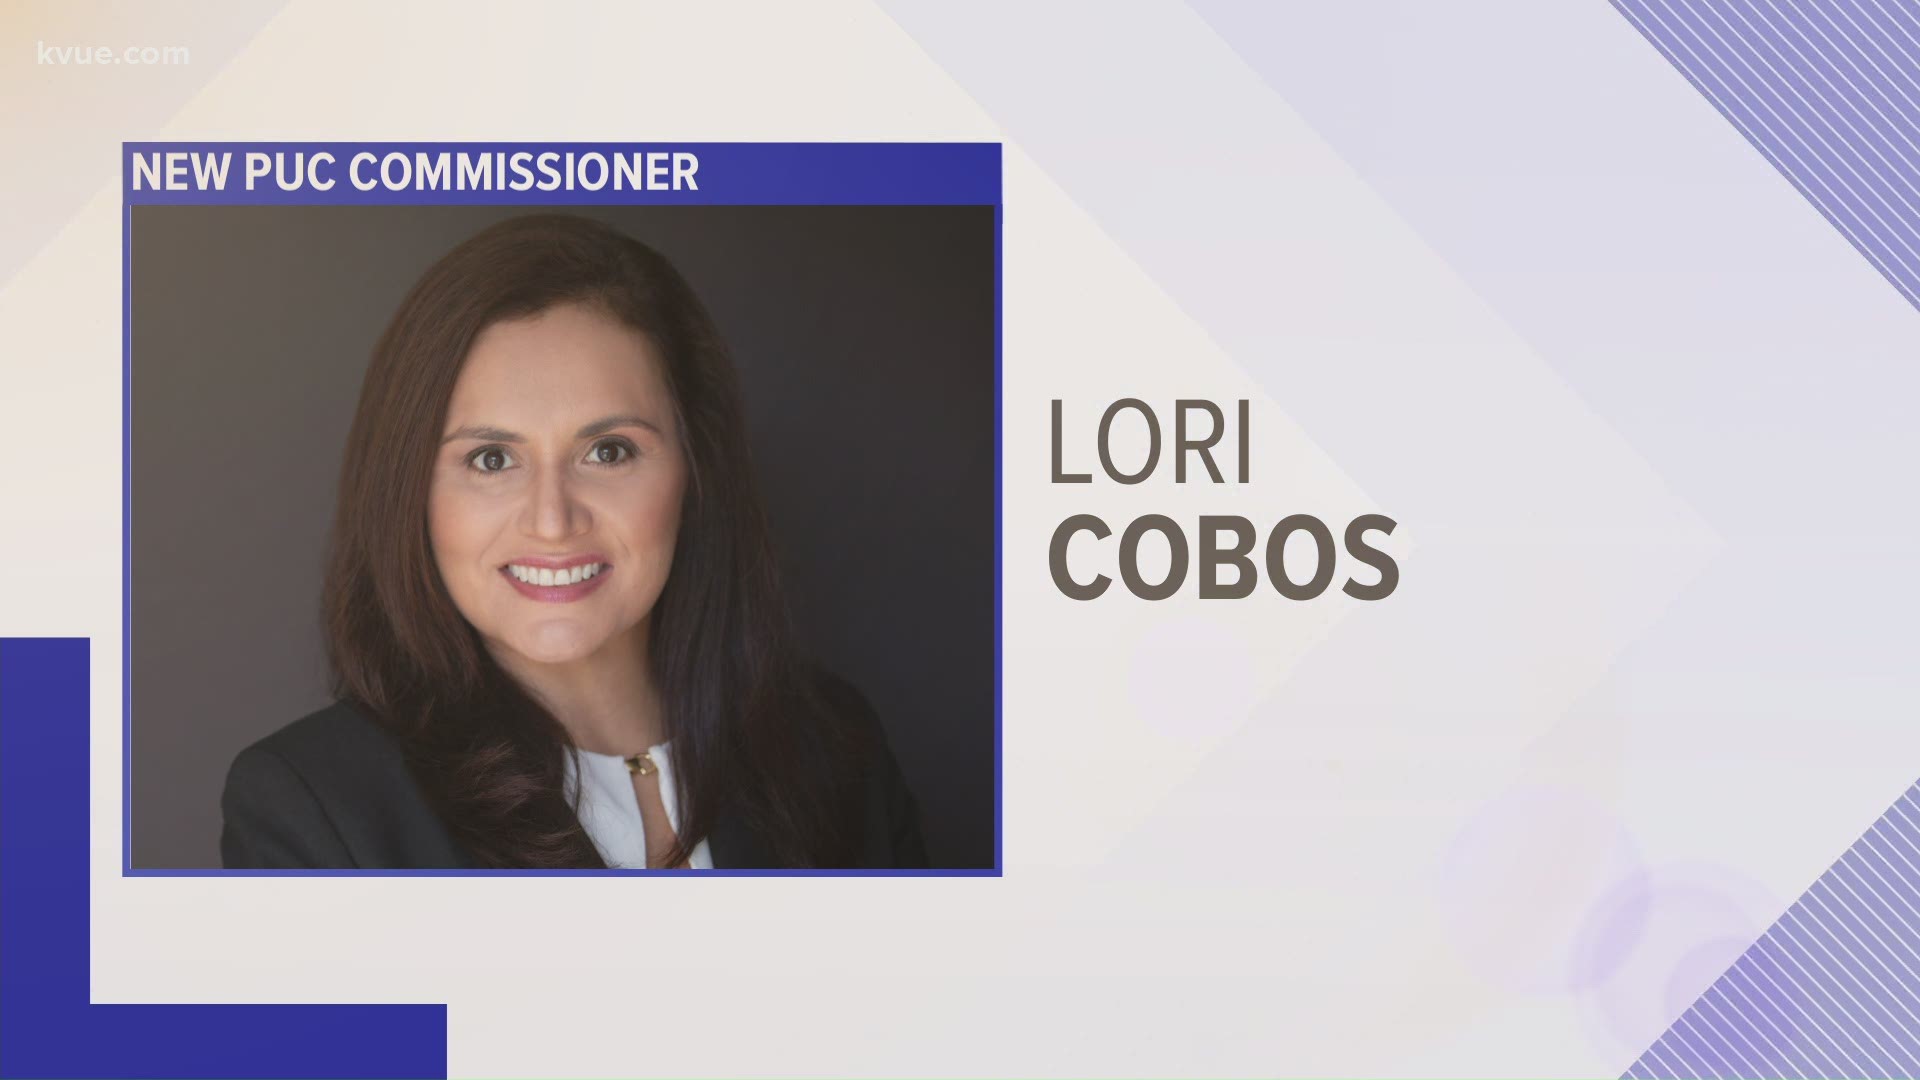 Lori Cobos has over 17 years of broad experience in the Texas electric power industry in both the public and private sectors.